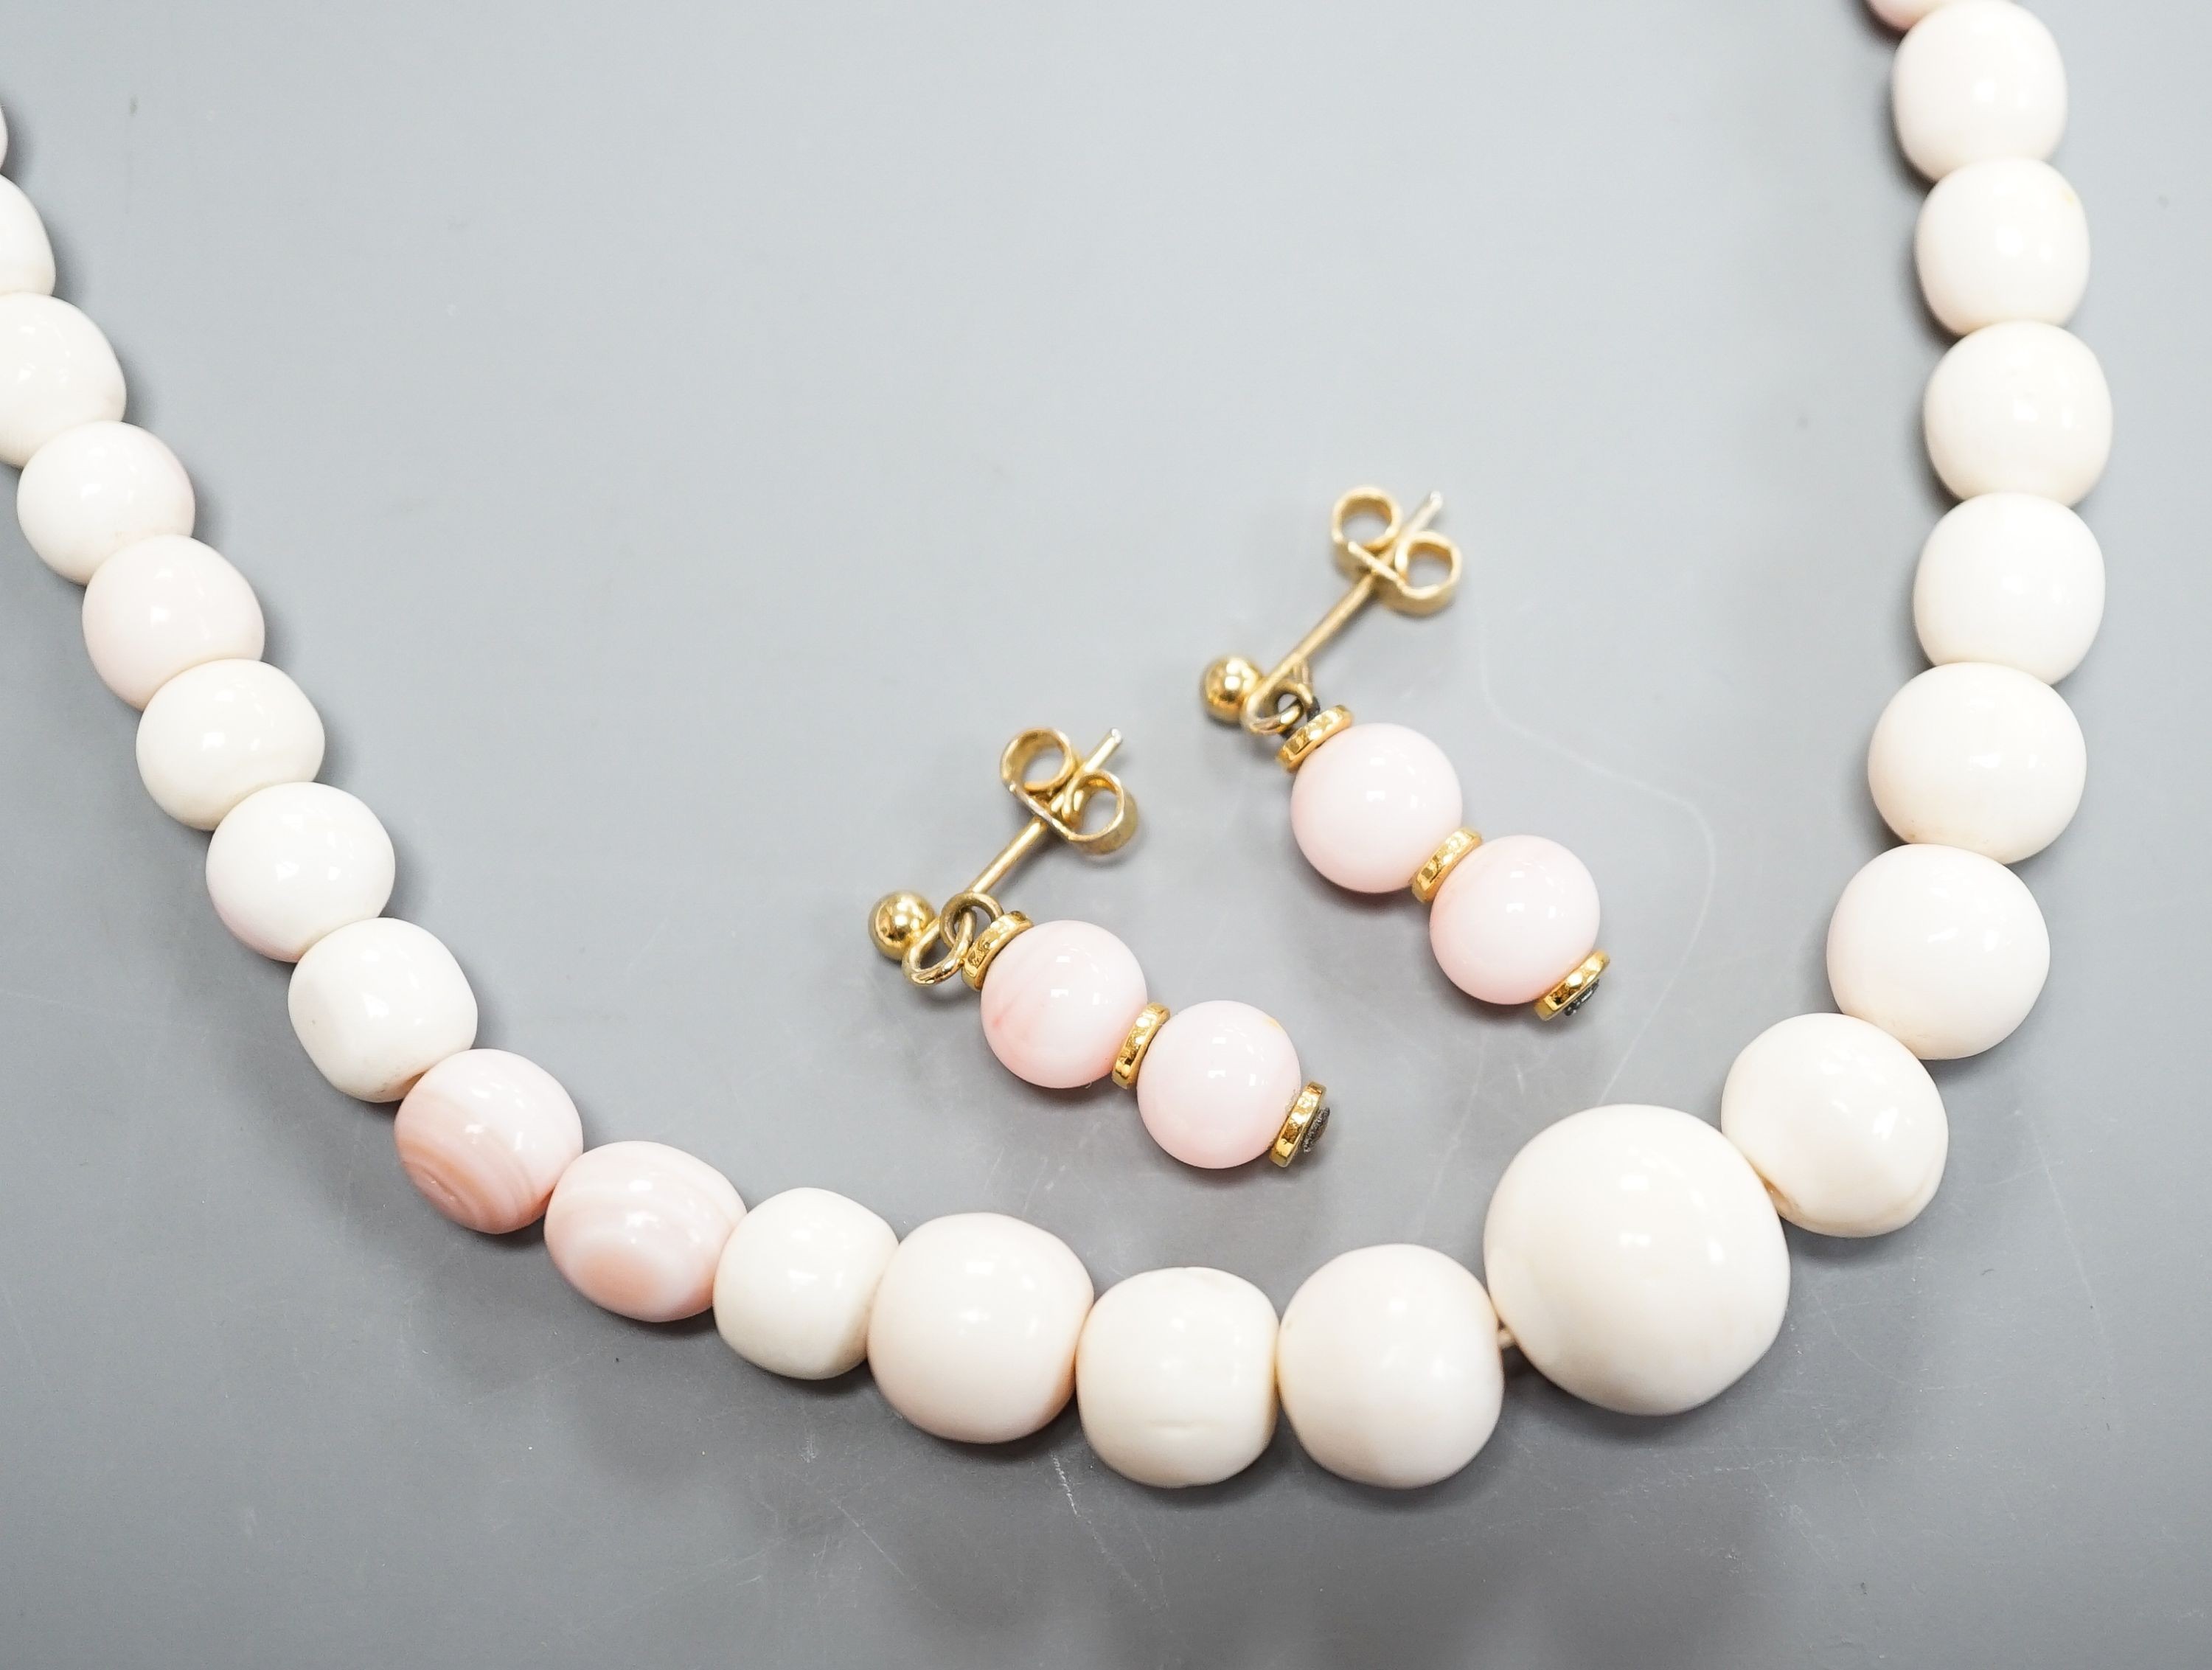 A single strand graduated bleached coral bead necklace, 51cm, gross 43.5 grams and a pair of 750